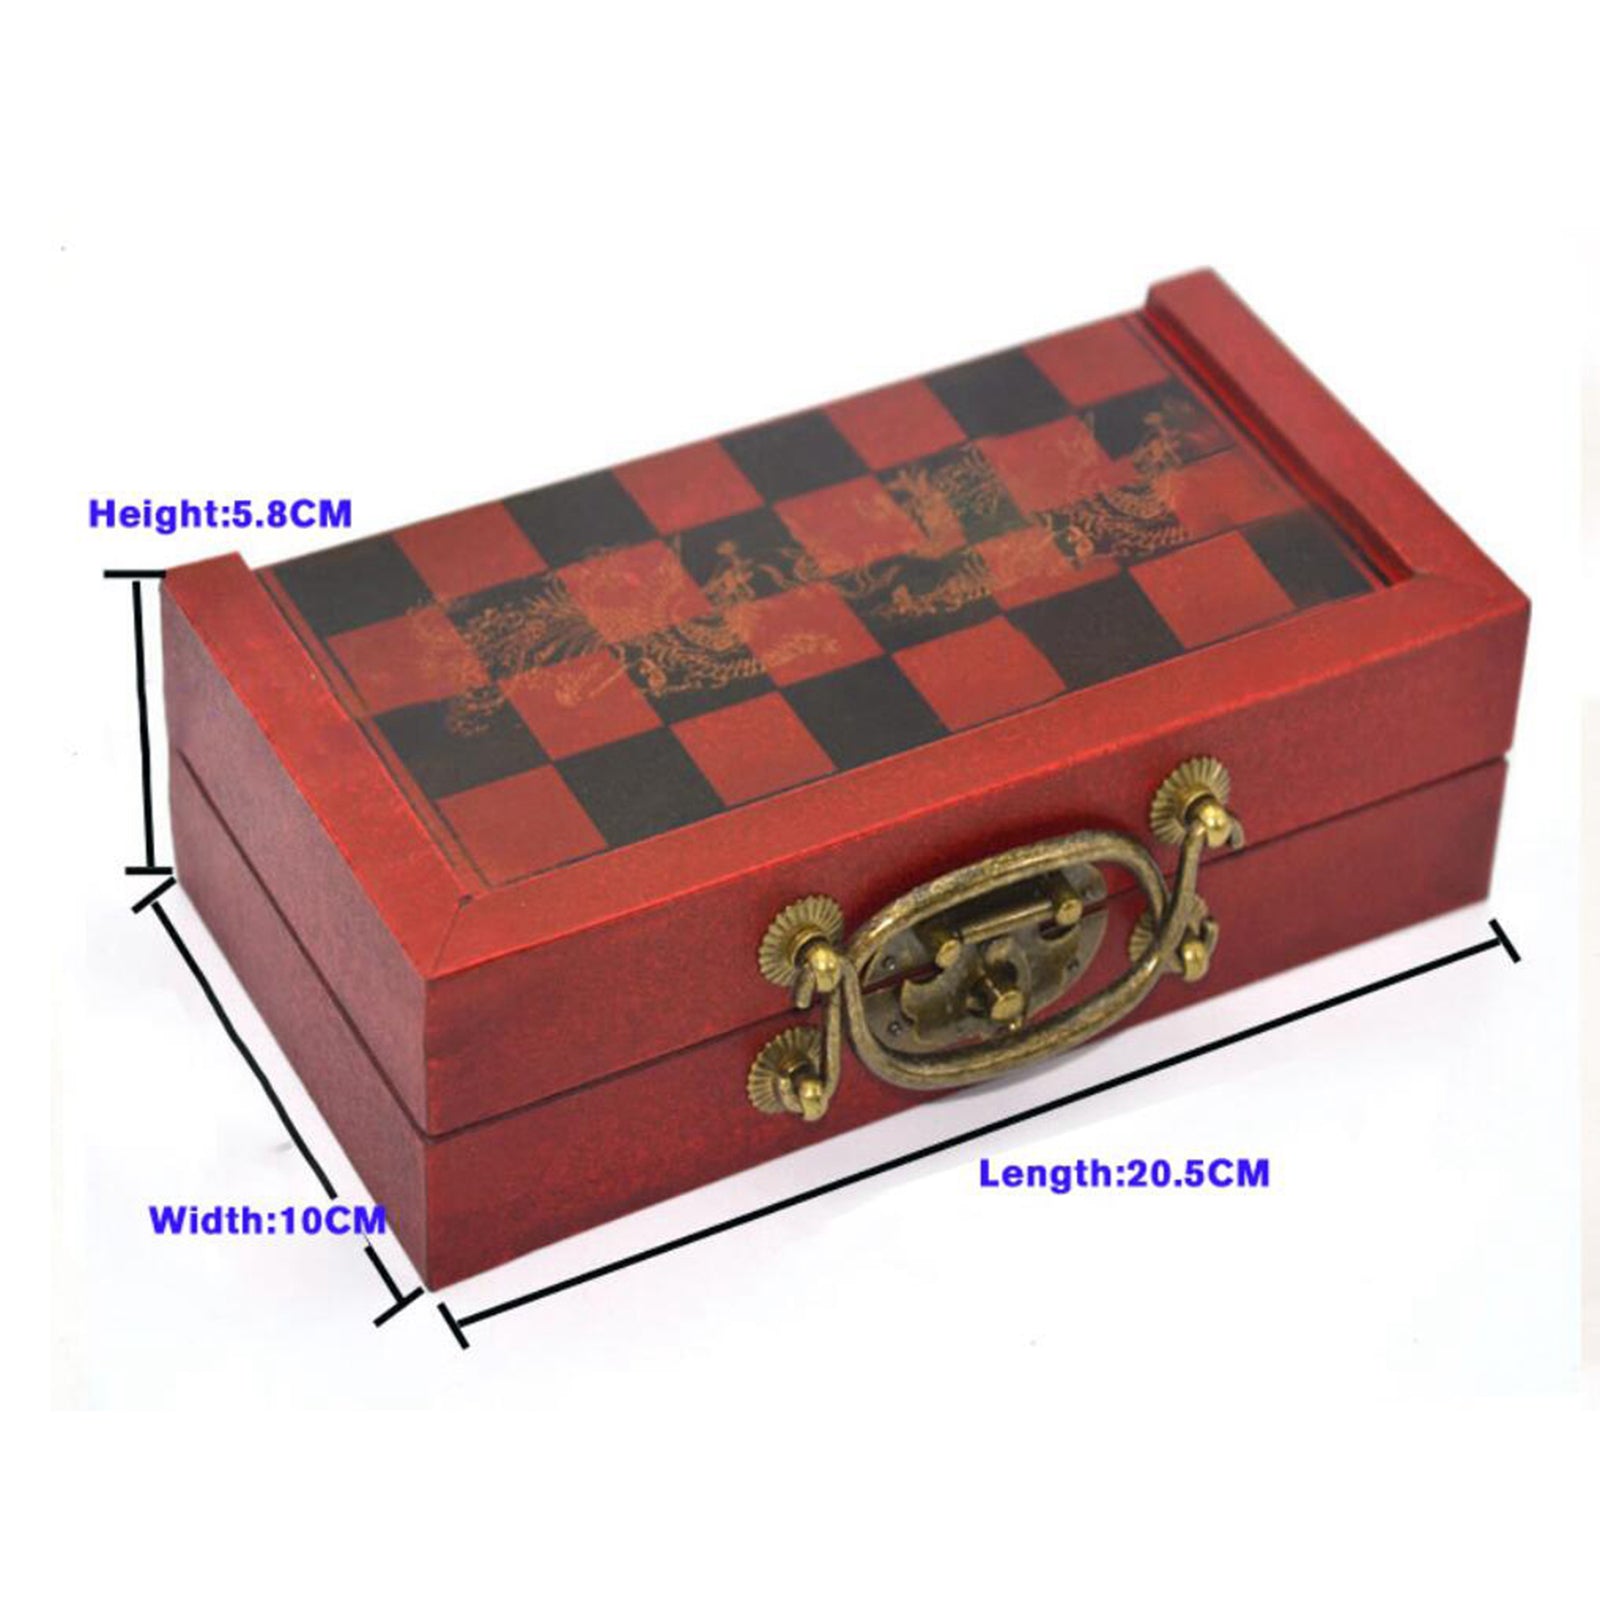 Travel Chess Set Chinese Ancient Figurines Chessman Pieces Chess Set for Kid